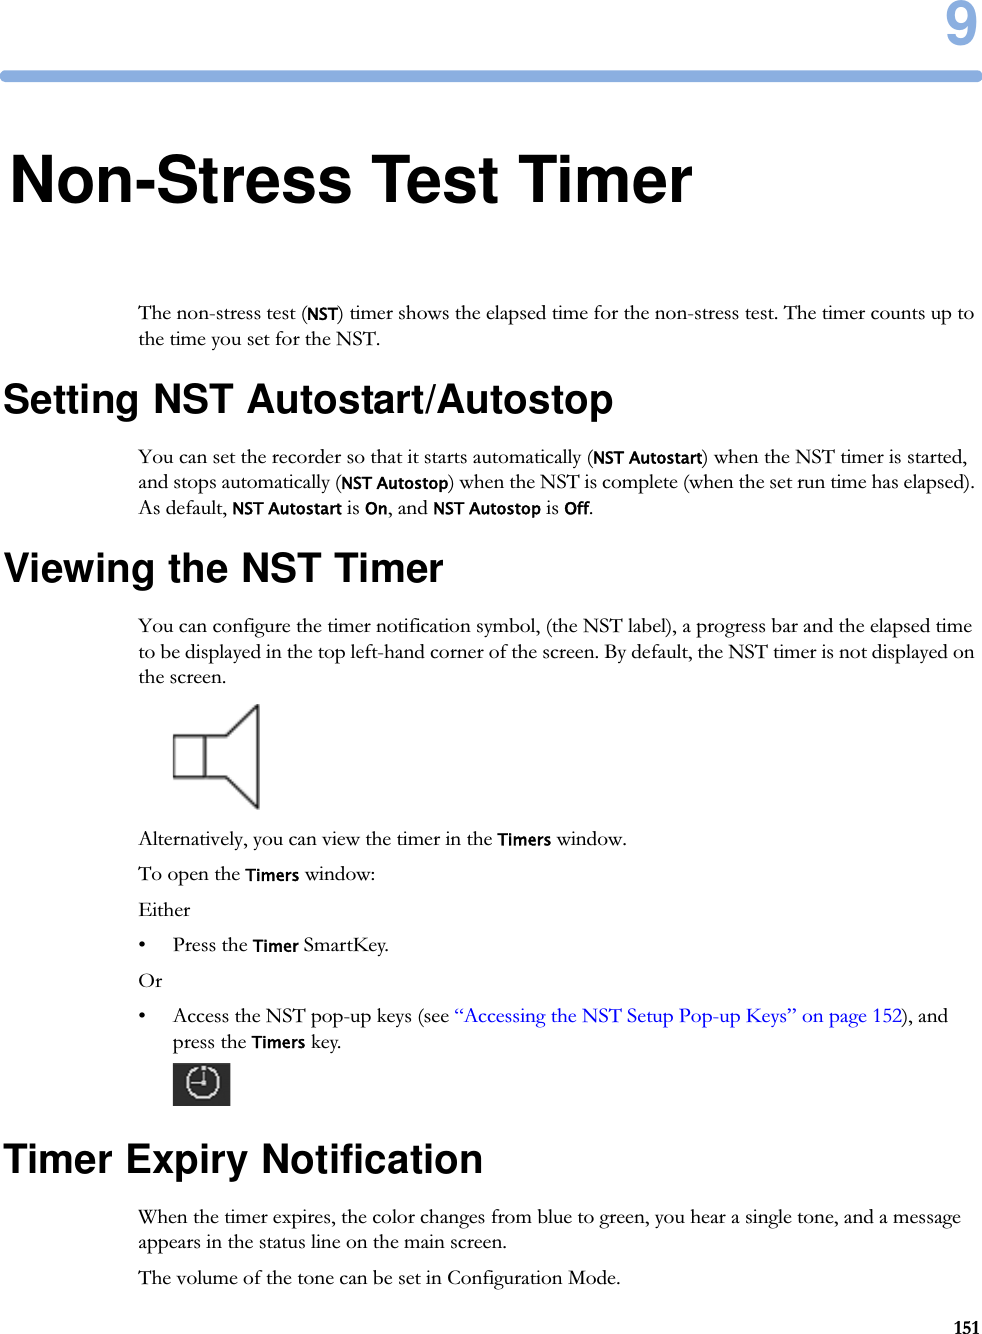 91519Non-Stress Test TimerThe non-stress test (NST) timer shows the elapsed time for the non-stress test. The timer counts up to the time you set for the NST.Setting NST Autostart/AutostopYou can set the recorder so that it starts automatically (NST Autostart) when the NST timer is started, and stops automatically (NST Autostop) when the NST is complete (when the set run time has elapsed). As default, NST Autostart is On, and NST Autostop is Off.Viewing the NST TimerYou can configure the timer notification symbol, (the NST label), a progress bar and the elapsed time to be displayed in the top left-hand corner of the screen. By default, the NST timer is not displayed on the screen.Alternatively, you can view the timer in the Timers window.To open the Timers window:Either• Press the Timer SmartKey.Or• Access the NST pop-up keys (see “Accessing the NST Setup Pop-up Keys” on page 152), and press the Timers key.Timer Expiry NotificationWhen the timer expires, the color changes from blue to green, you hear a single tone, and a message appears in the status line on the main screen.The volume of the tone can be set in Configuration Mode.